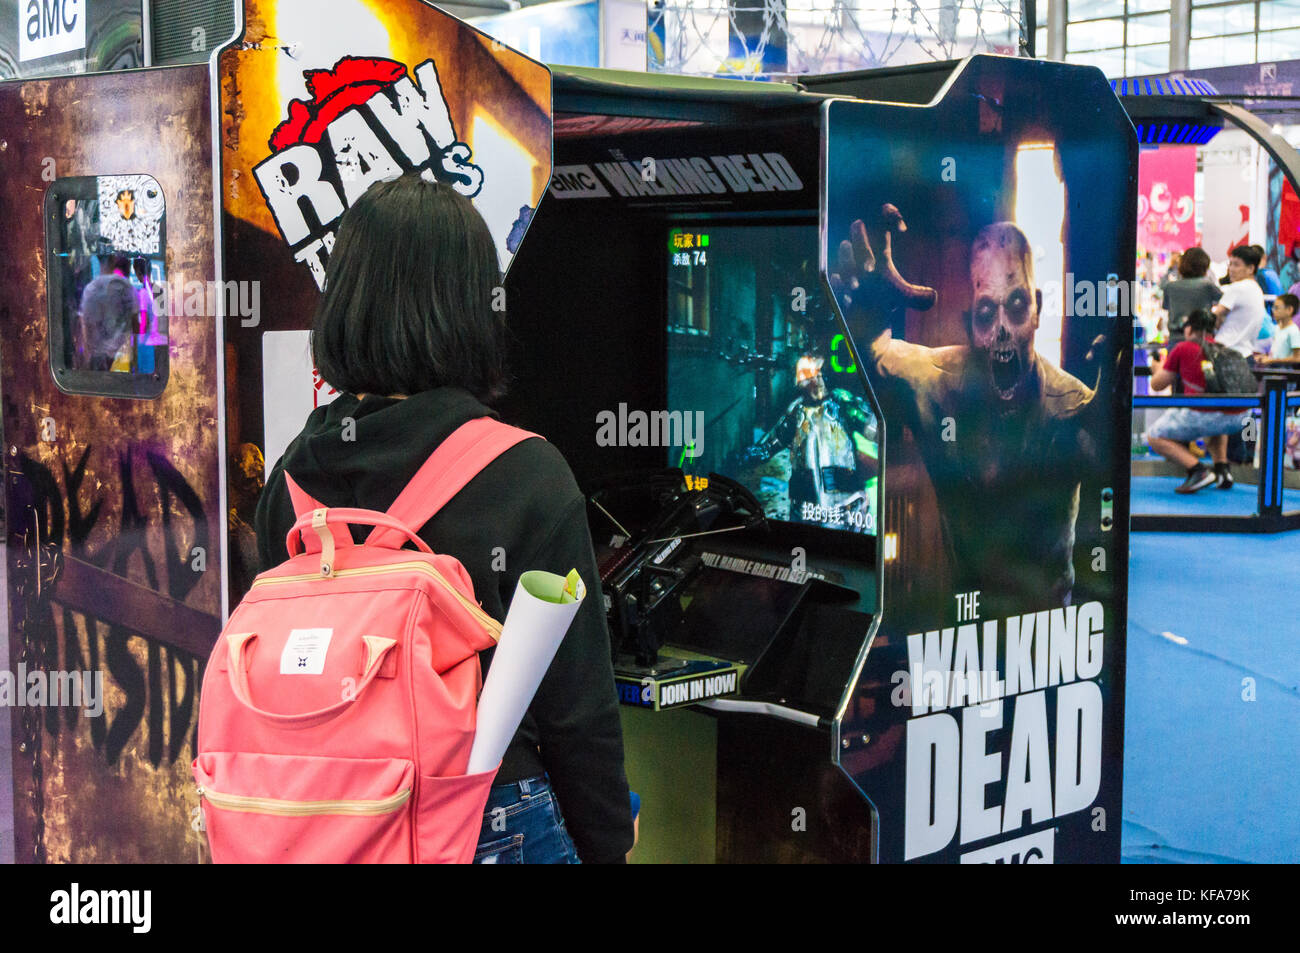 Walking Dead video game booth and female spectator Stock Photo